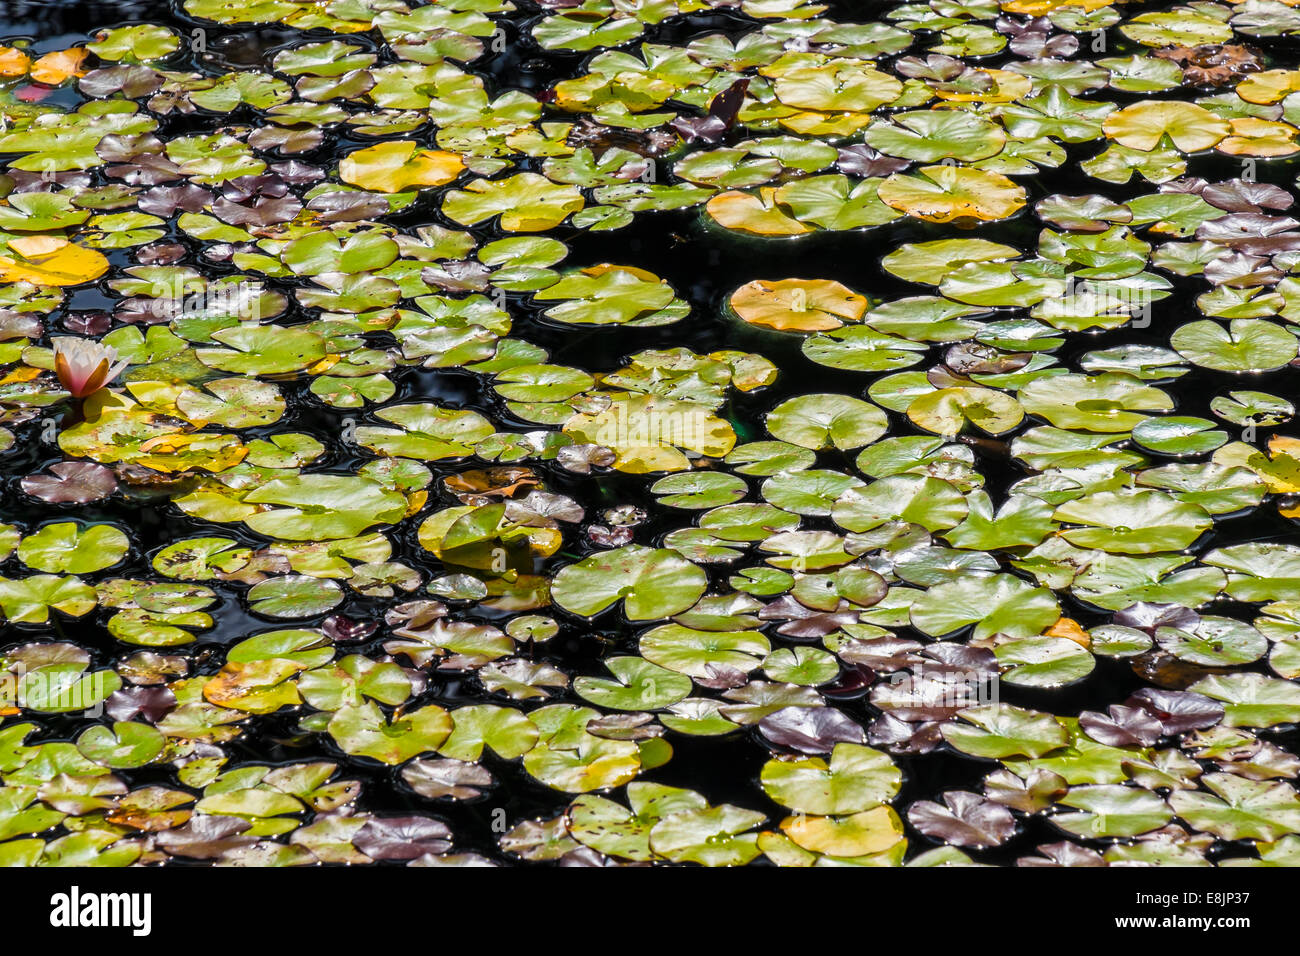 Lily pads floating on water Stock Photo